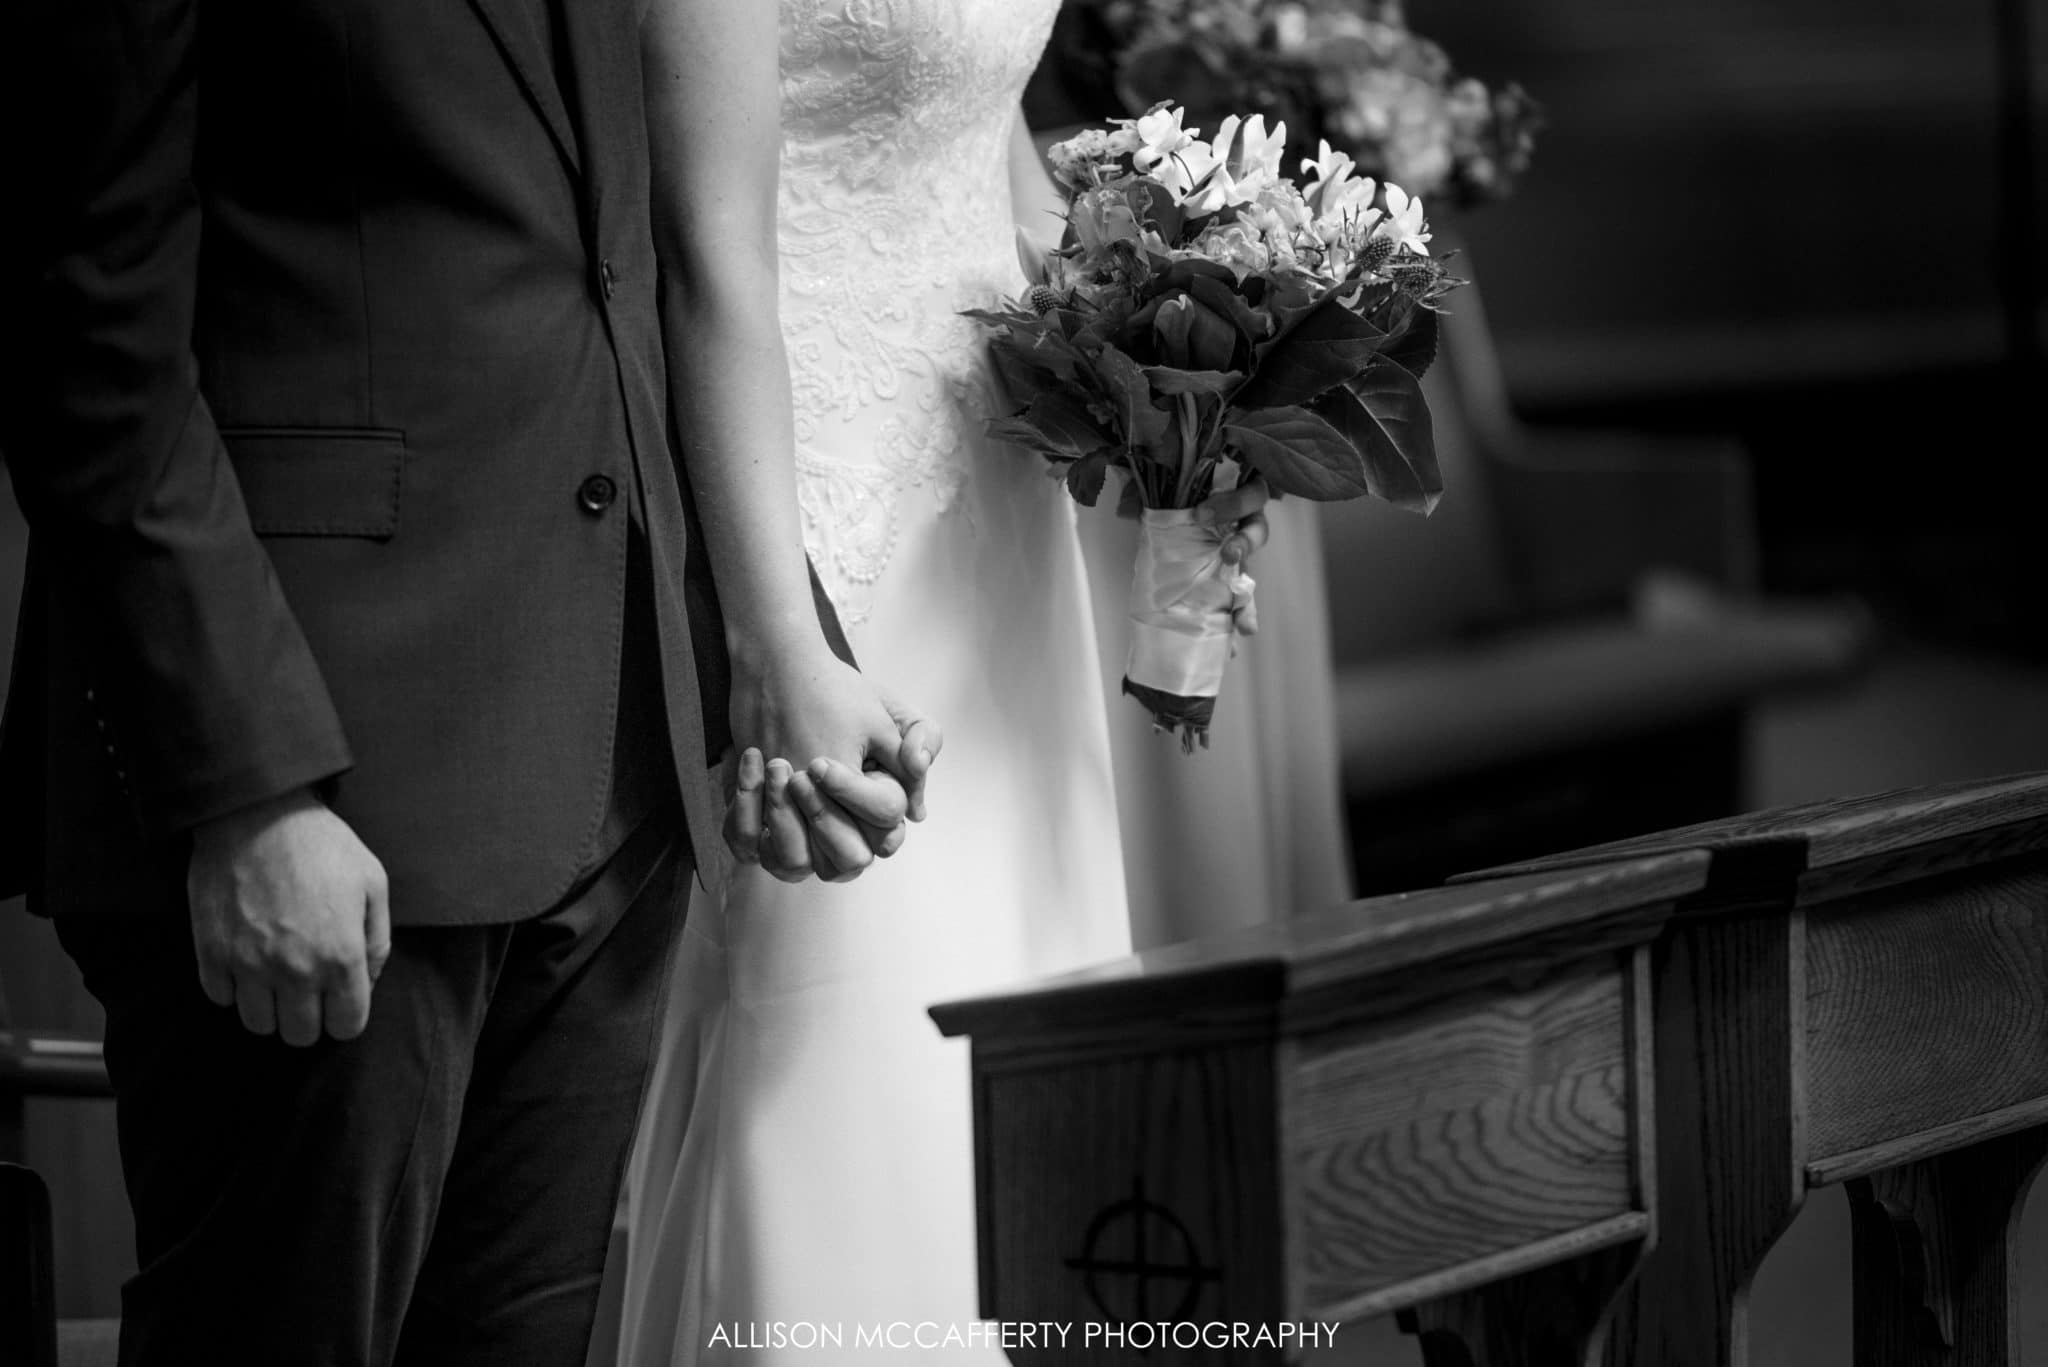 Black and white photo of bride and groom holding hands in church